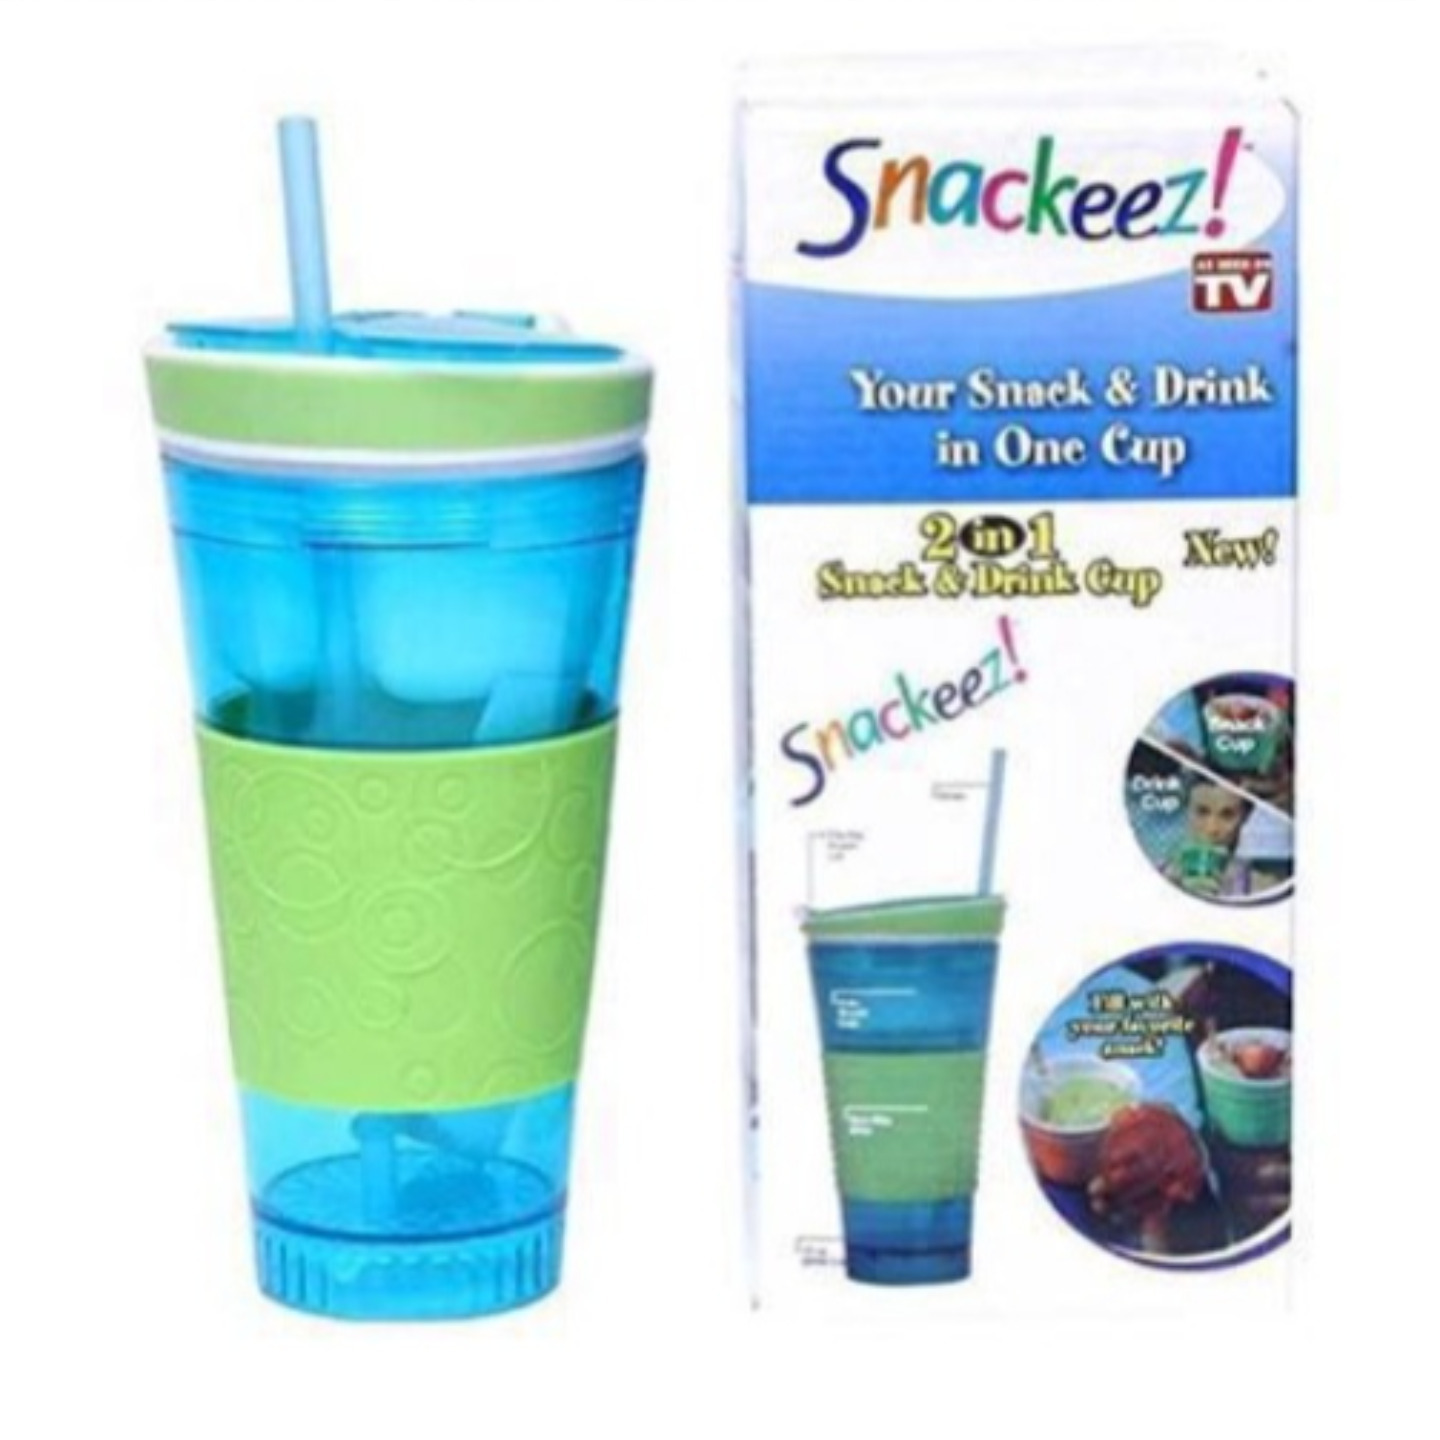 SAMYAKA® Snack & Eat in One Cup